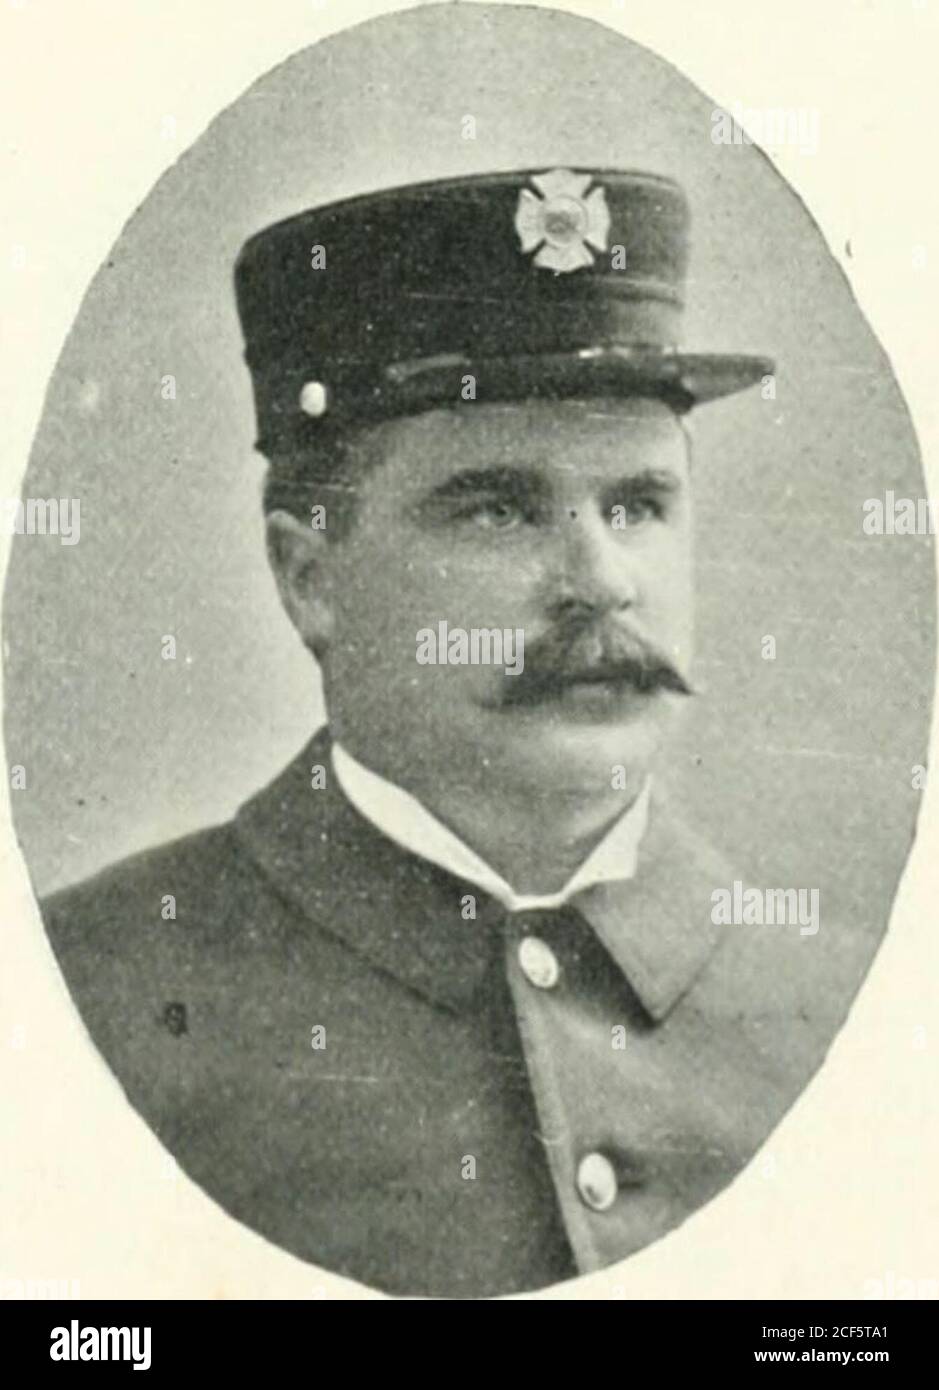 . The Exempt firemen of San Francisco; their unique and gallant record. W. F. CURRAN W. F. Curran was born in New York,May 16, 1862, and joined the Depart-ment October 15, 1894, as hoseman ofEngine No. 23, which rank he now holds.. V. J. SHIELDS GEORGE MCDONALD 222 SAN FRANCISCO FIREMEN Geo. McDonald, born in San Francisco,January 2, 1869, joined the DepartmentJanuary 6, 1893, as hoseman of EngineNo. 23, which is his present rank. Stock Photo